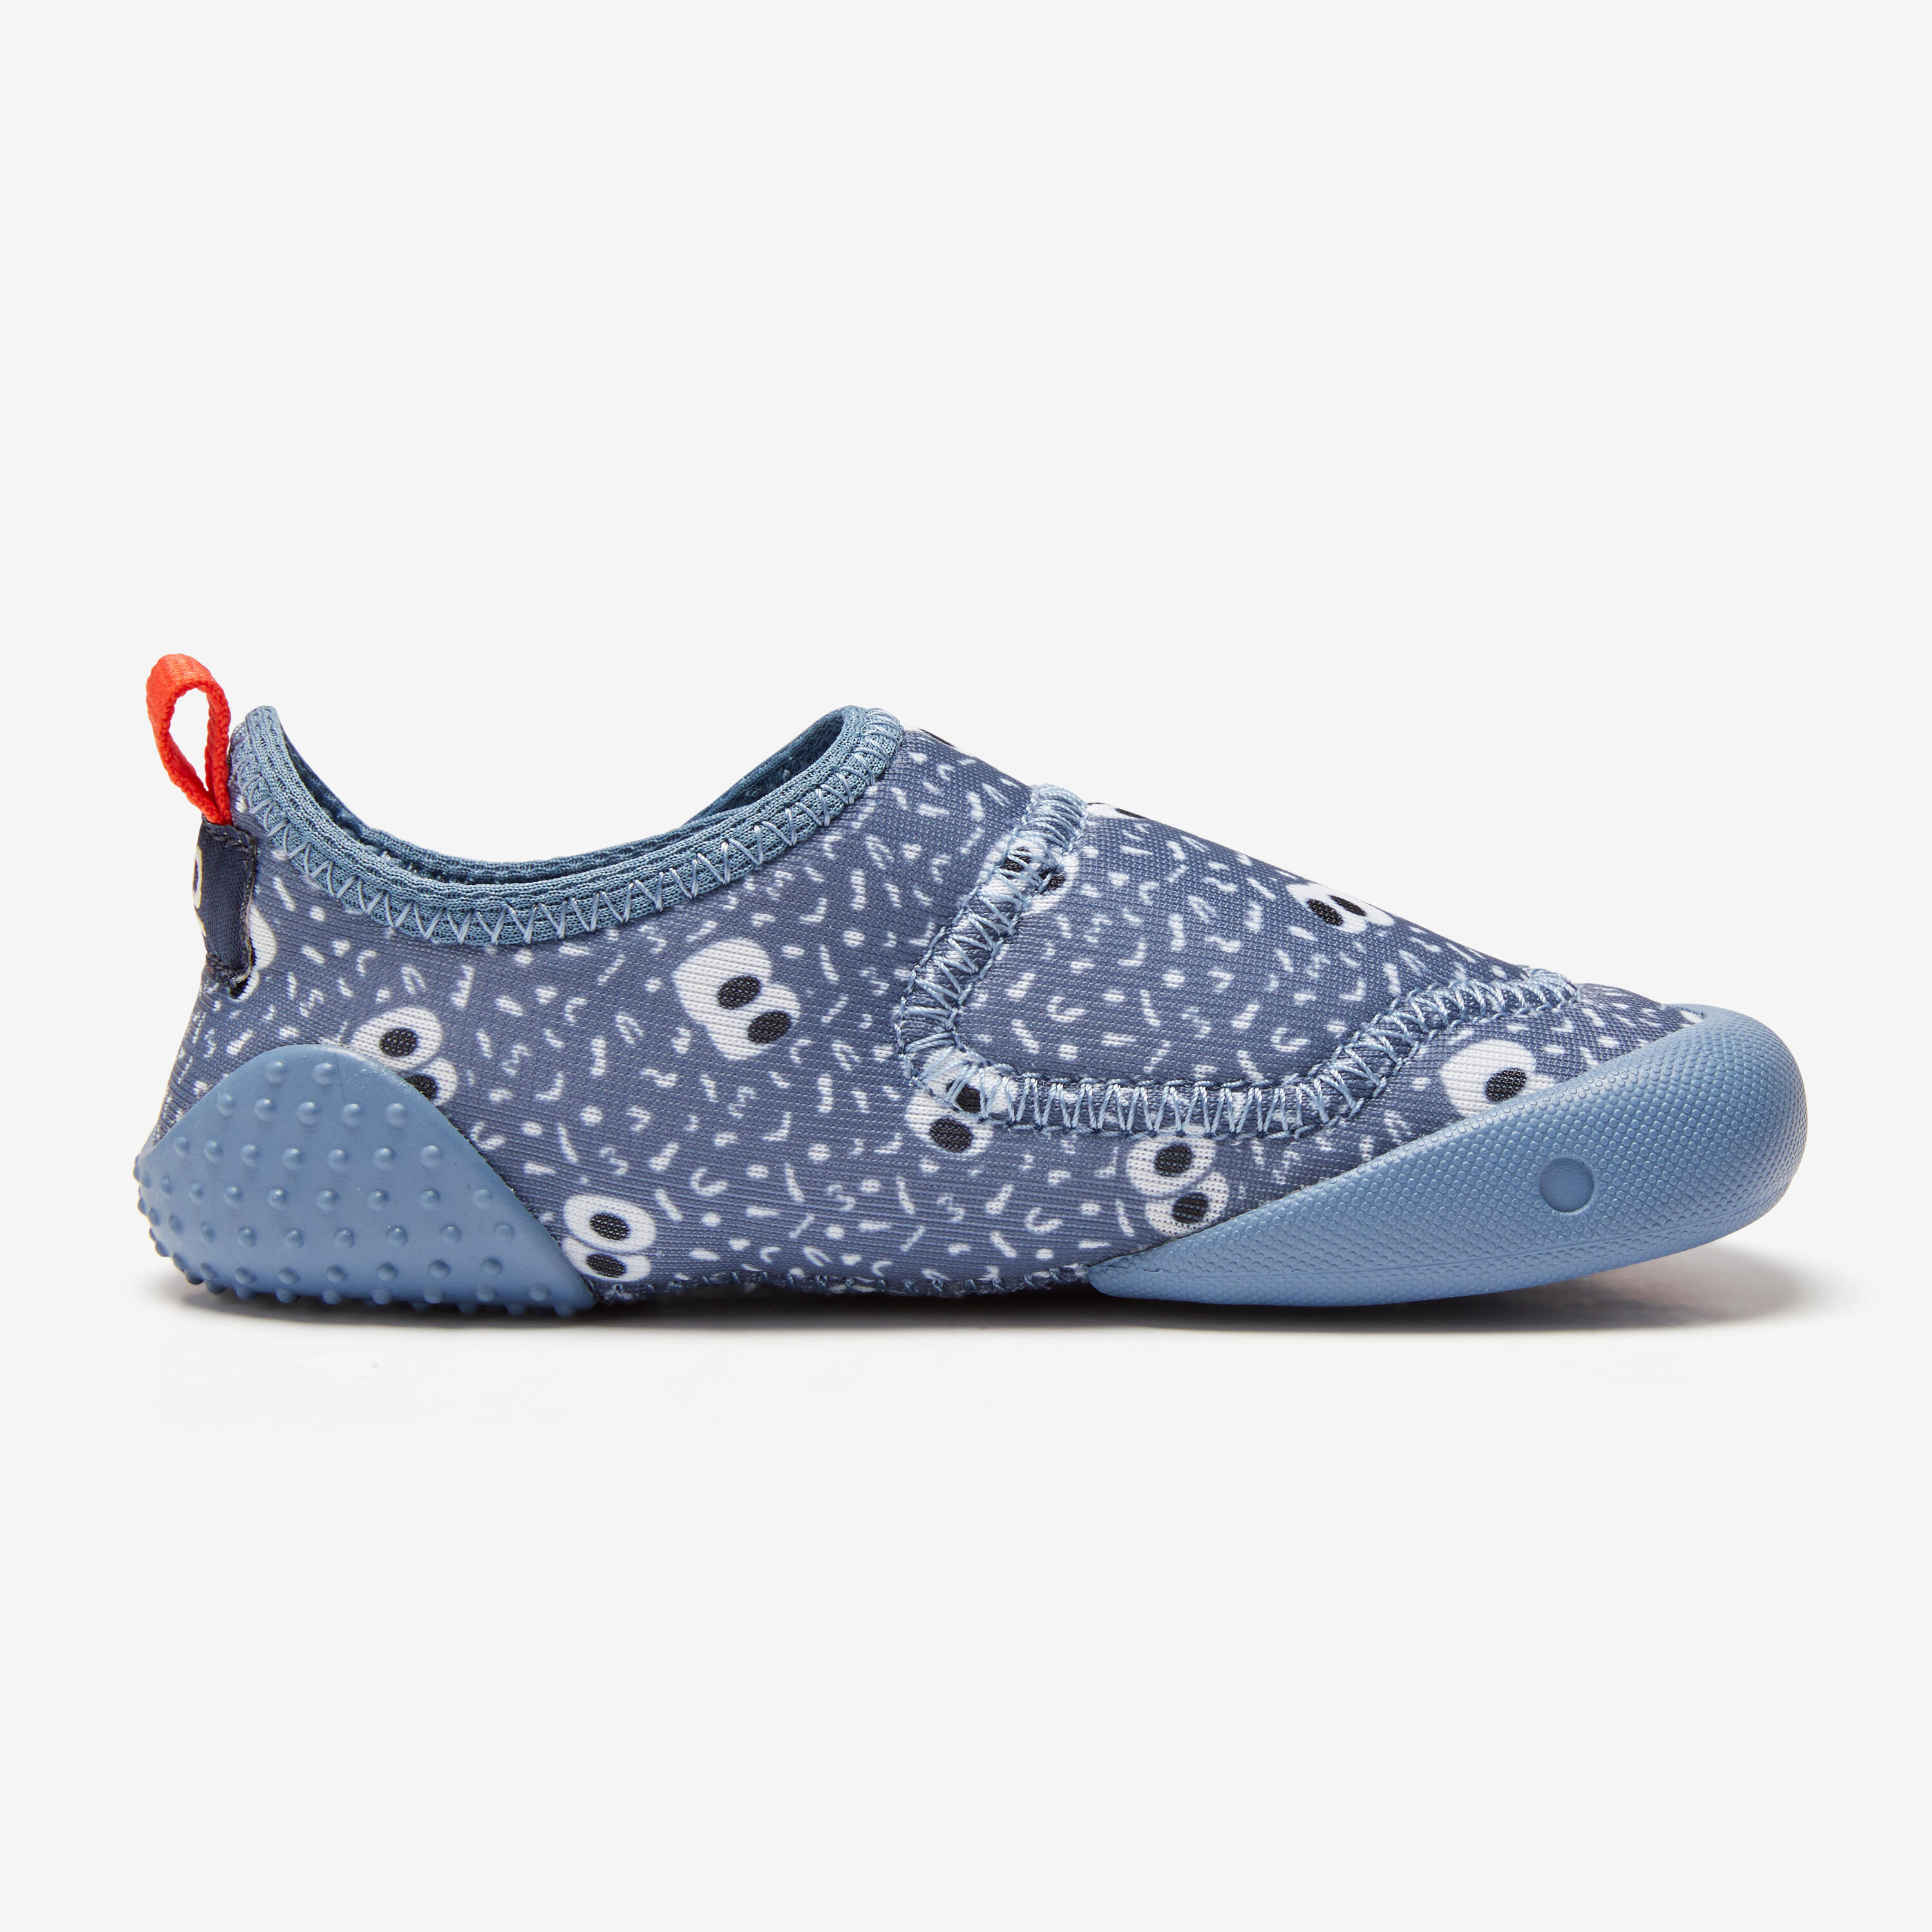 Kids' Non-Slip and Breathable Bootee - Patterns 5/8